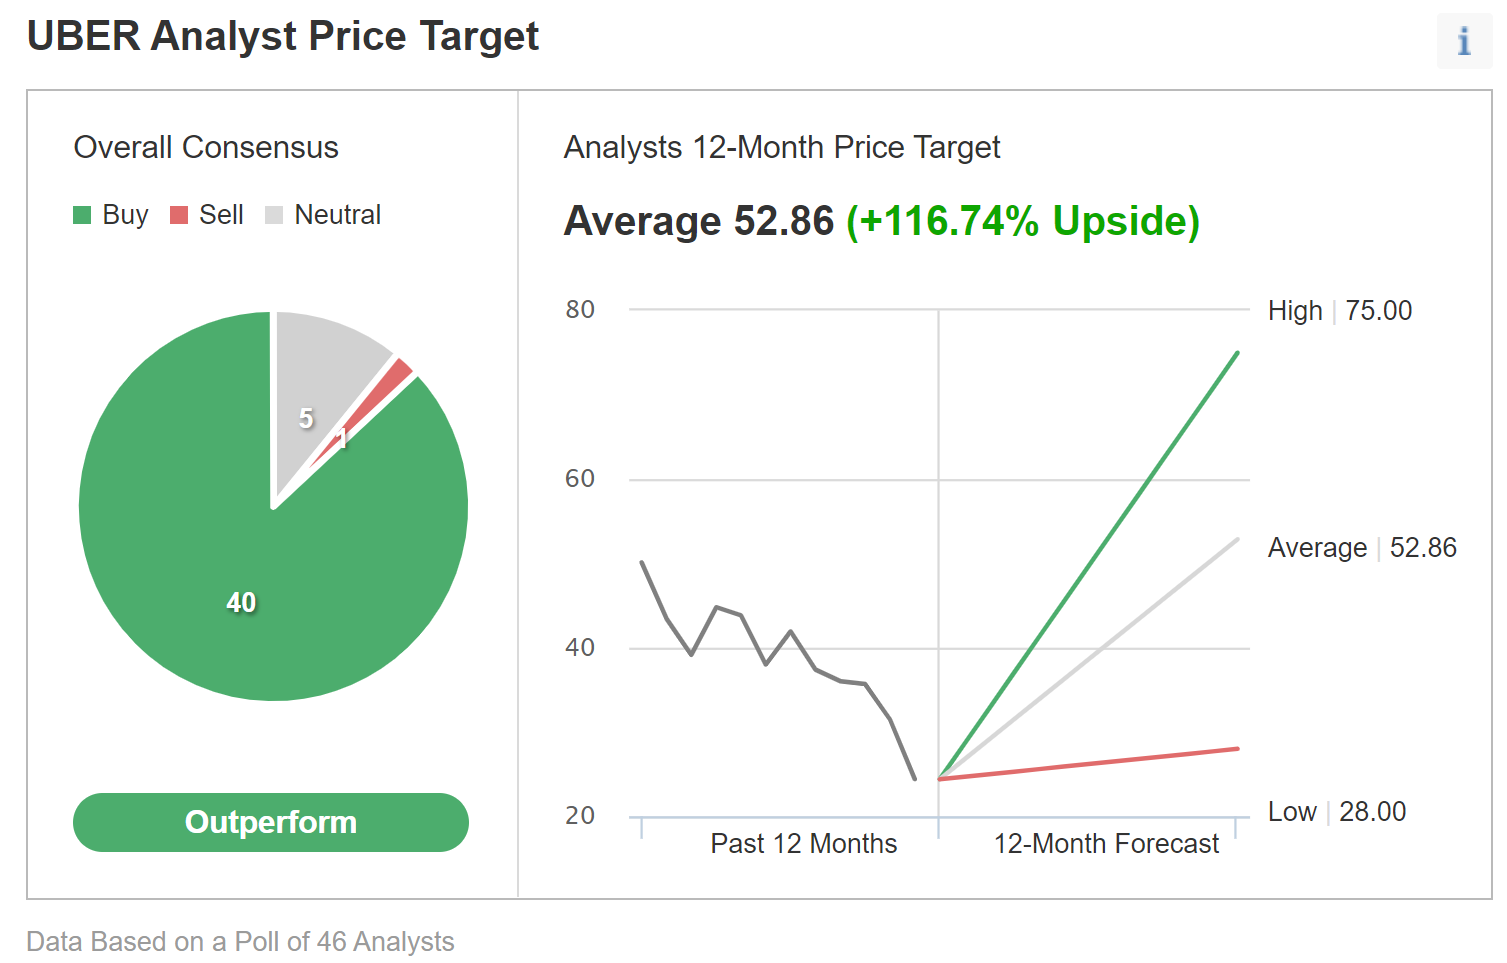 UBER Consensus Rating And 12-Month Price Target